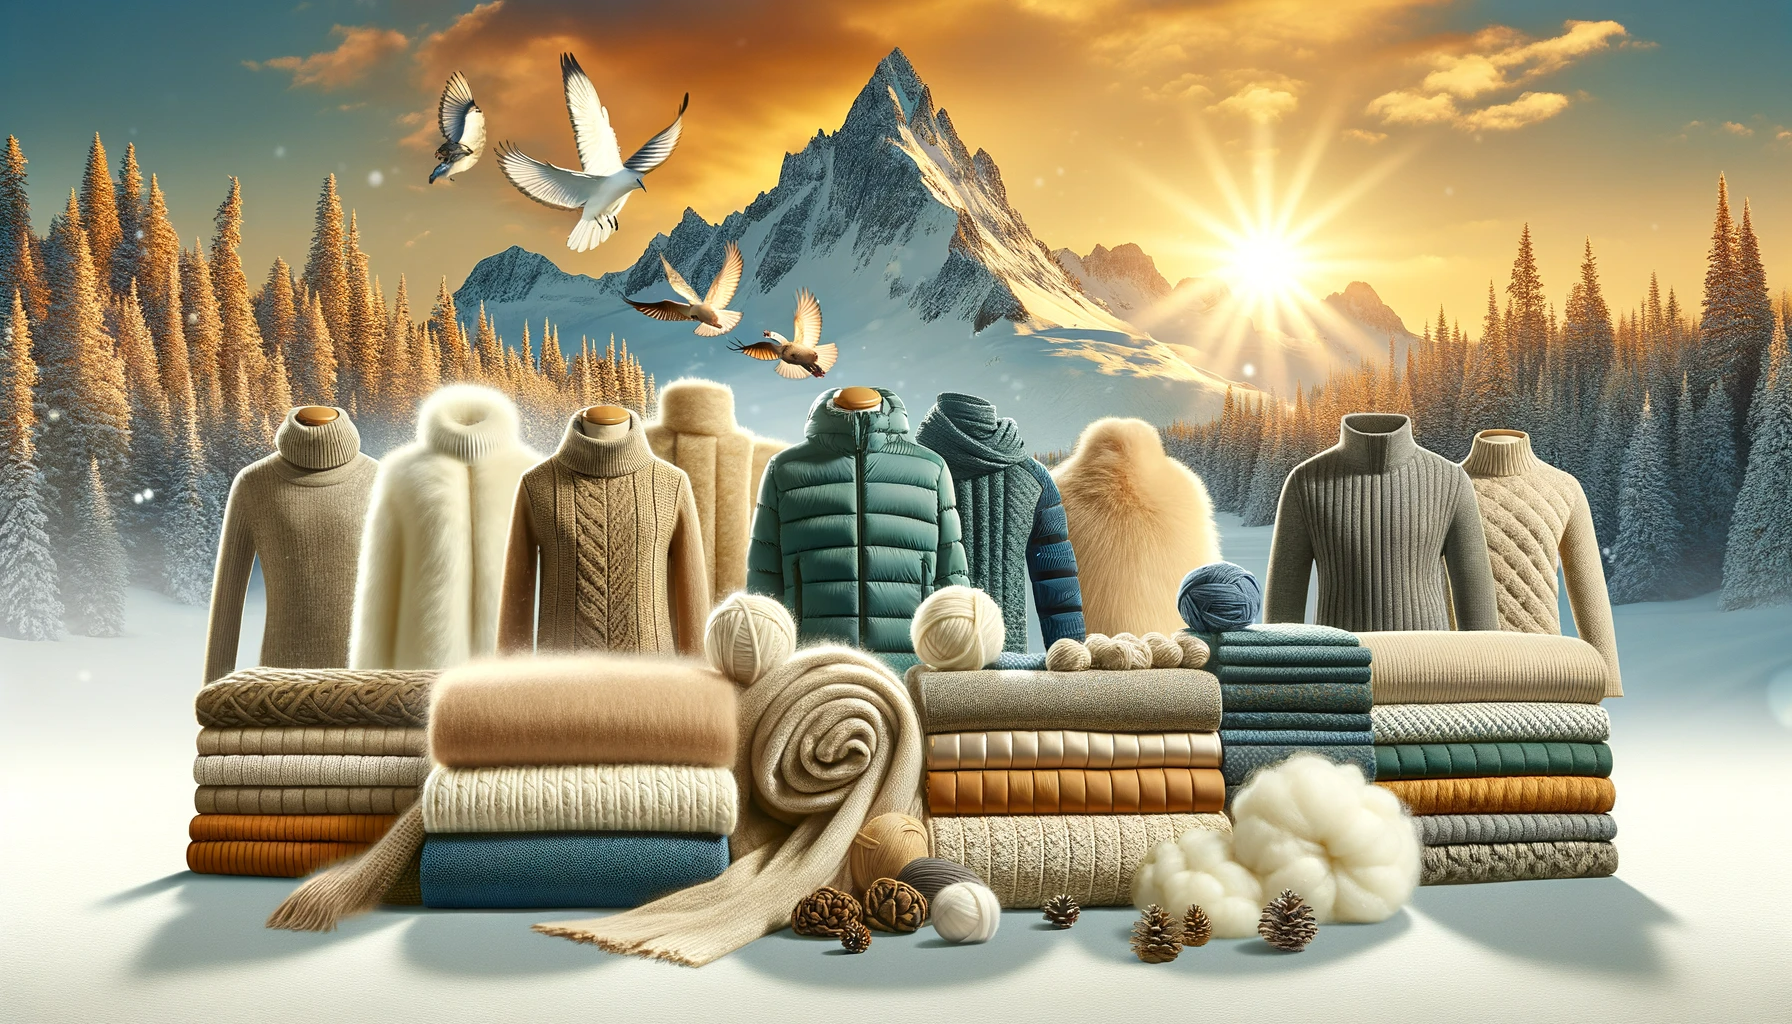 https://fcdrycleaners.com/wp-content/uploads/2024/02/How-to-Choose-the-Best-Fabric-for-Your-Winter-Clothing.png